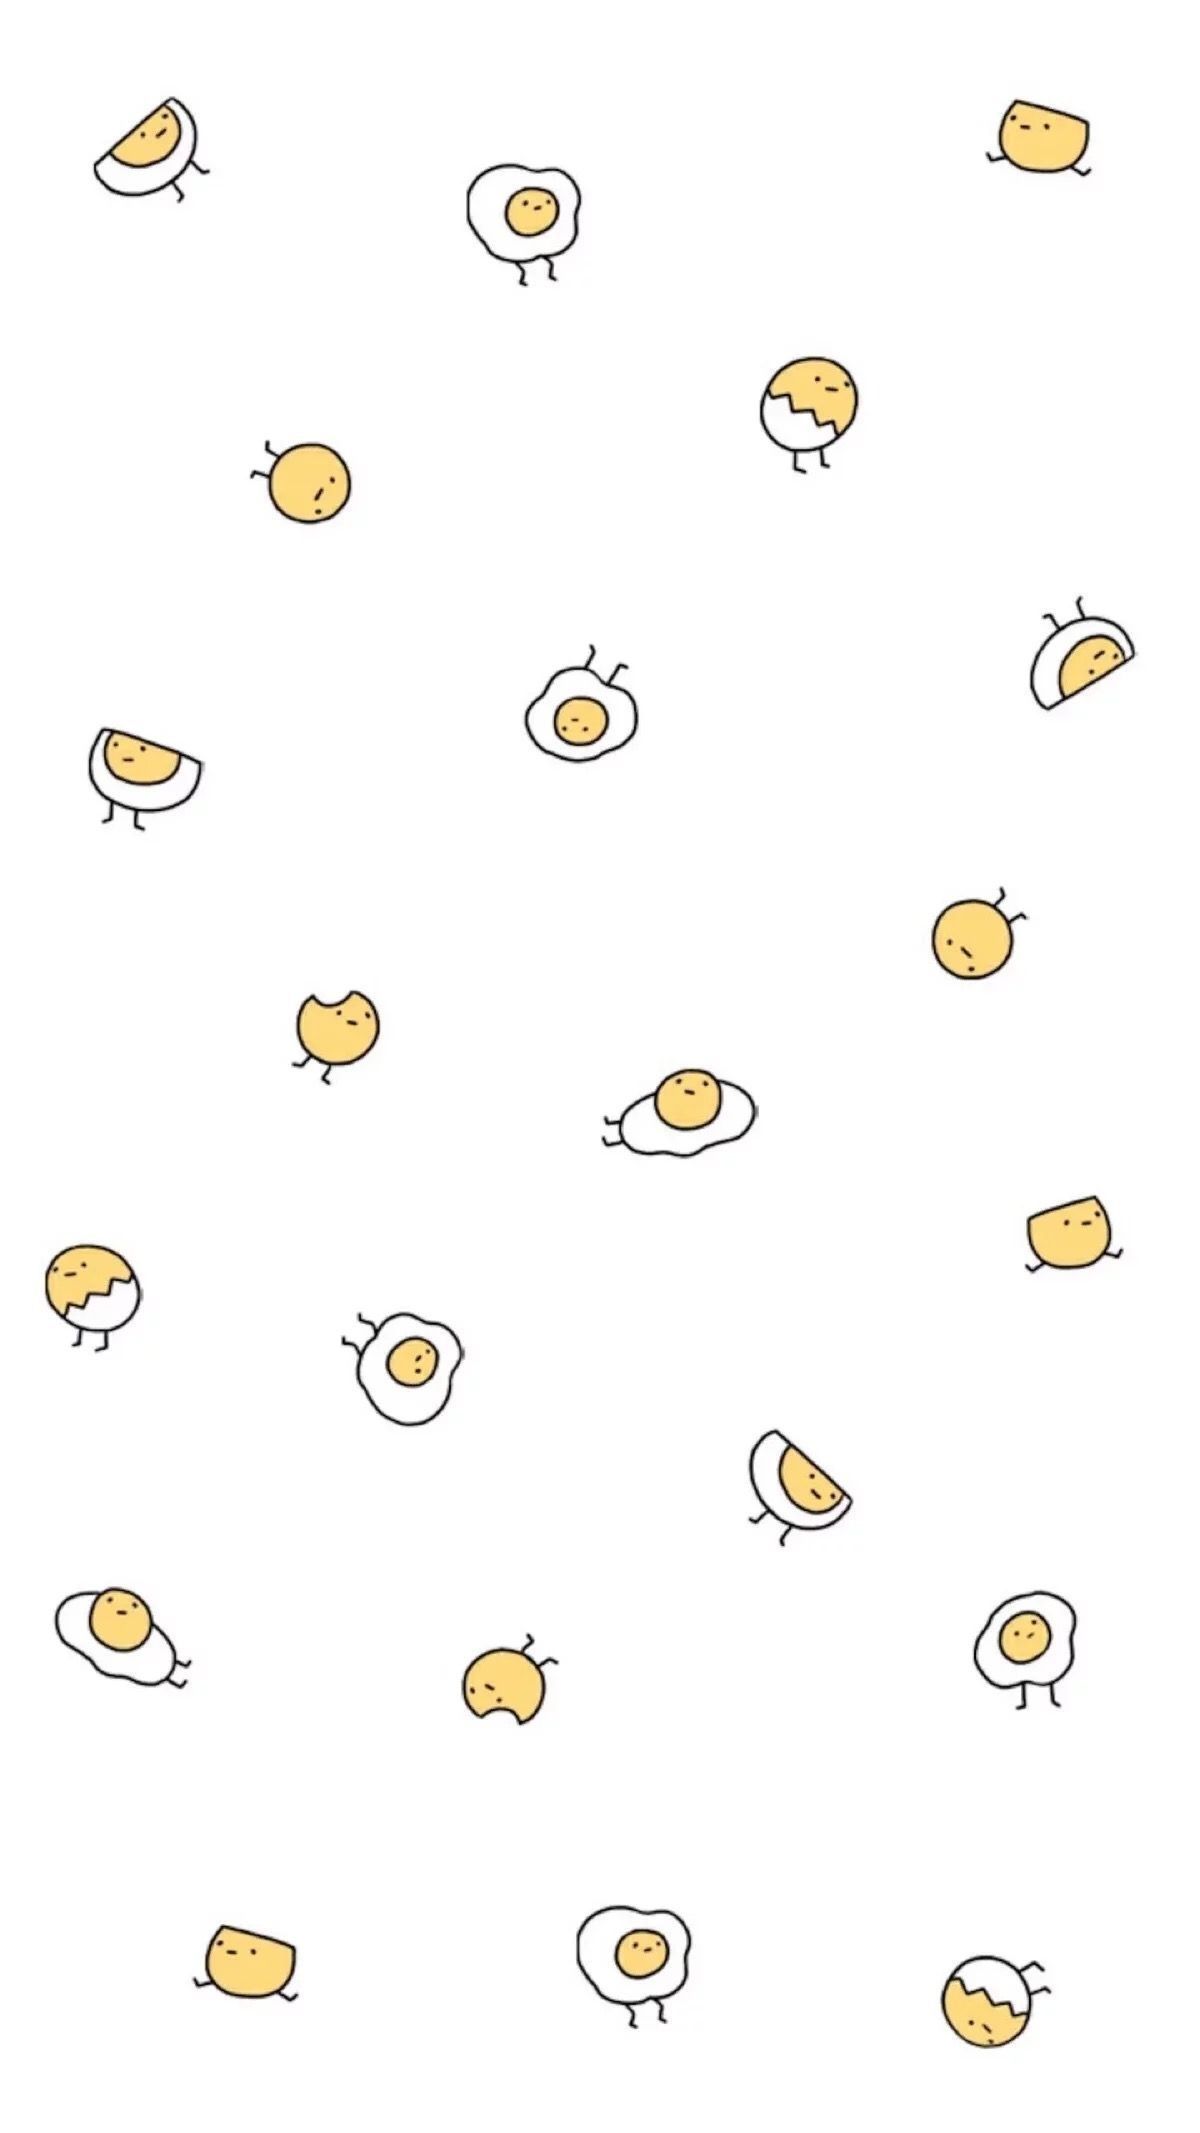 A pattern of eggs and other food items - Egg